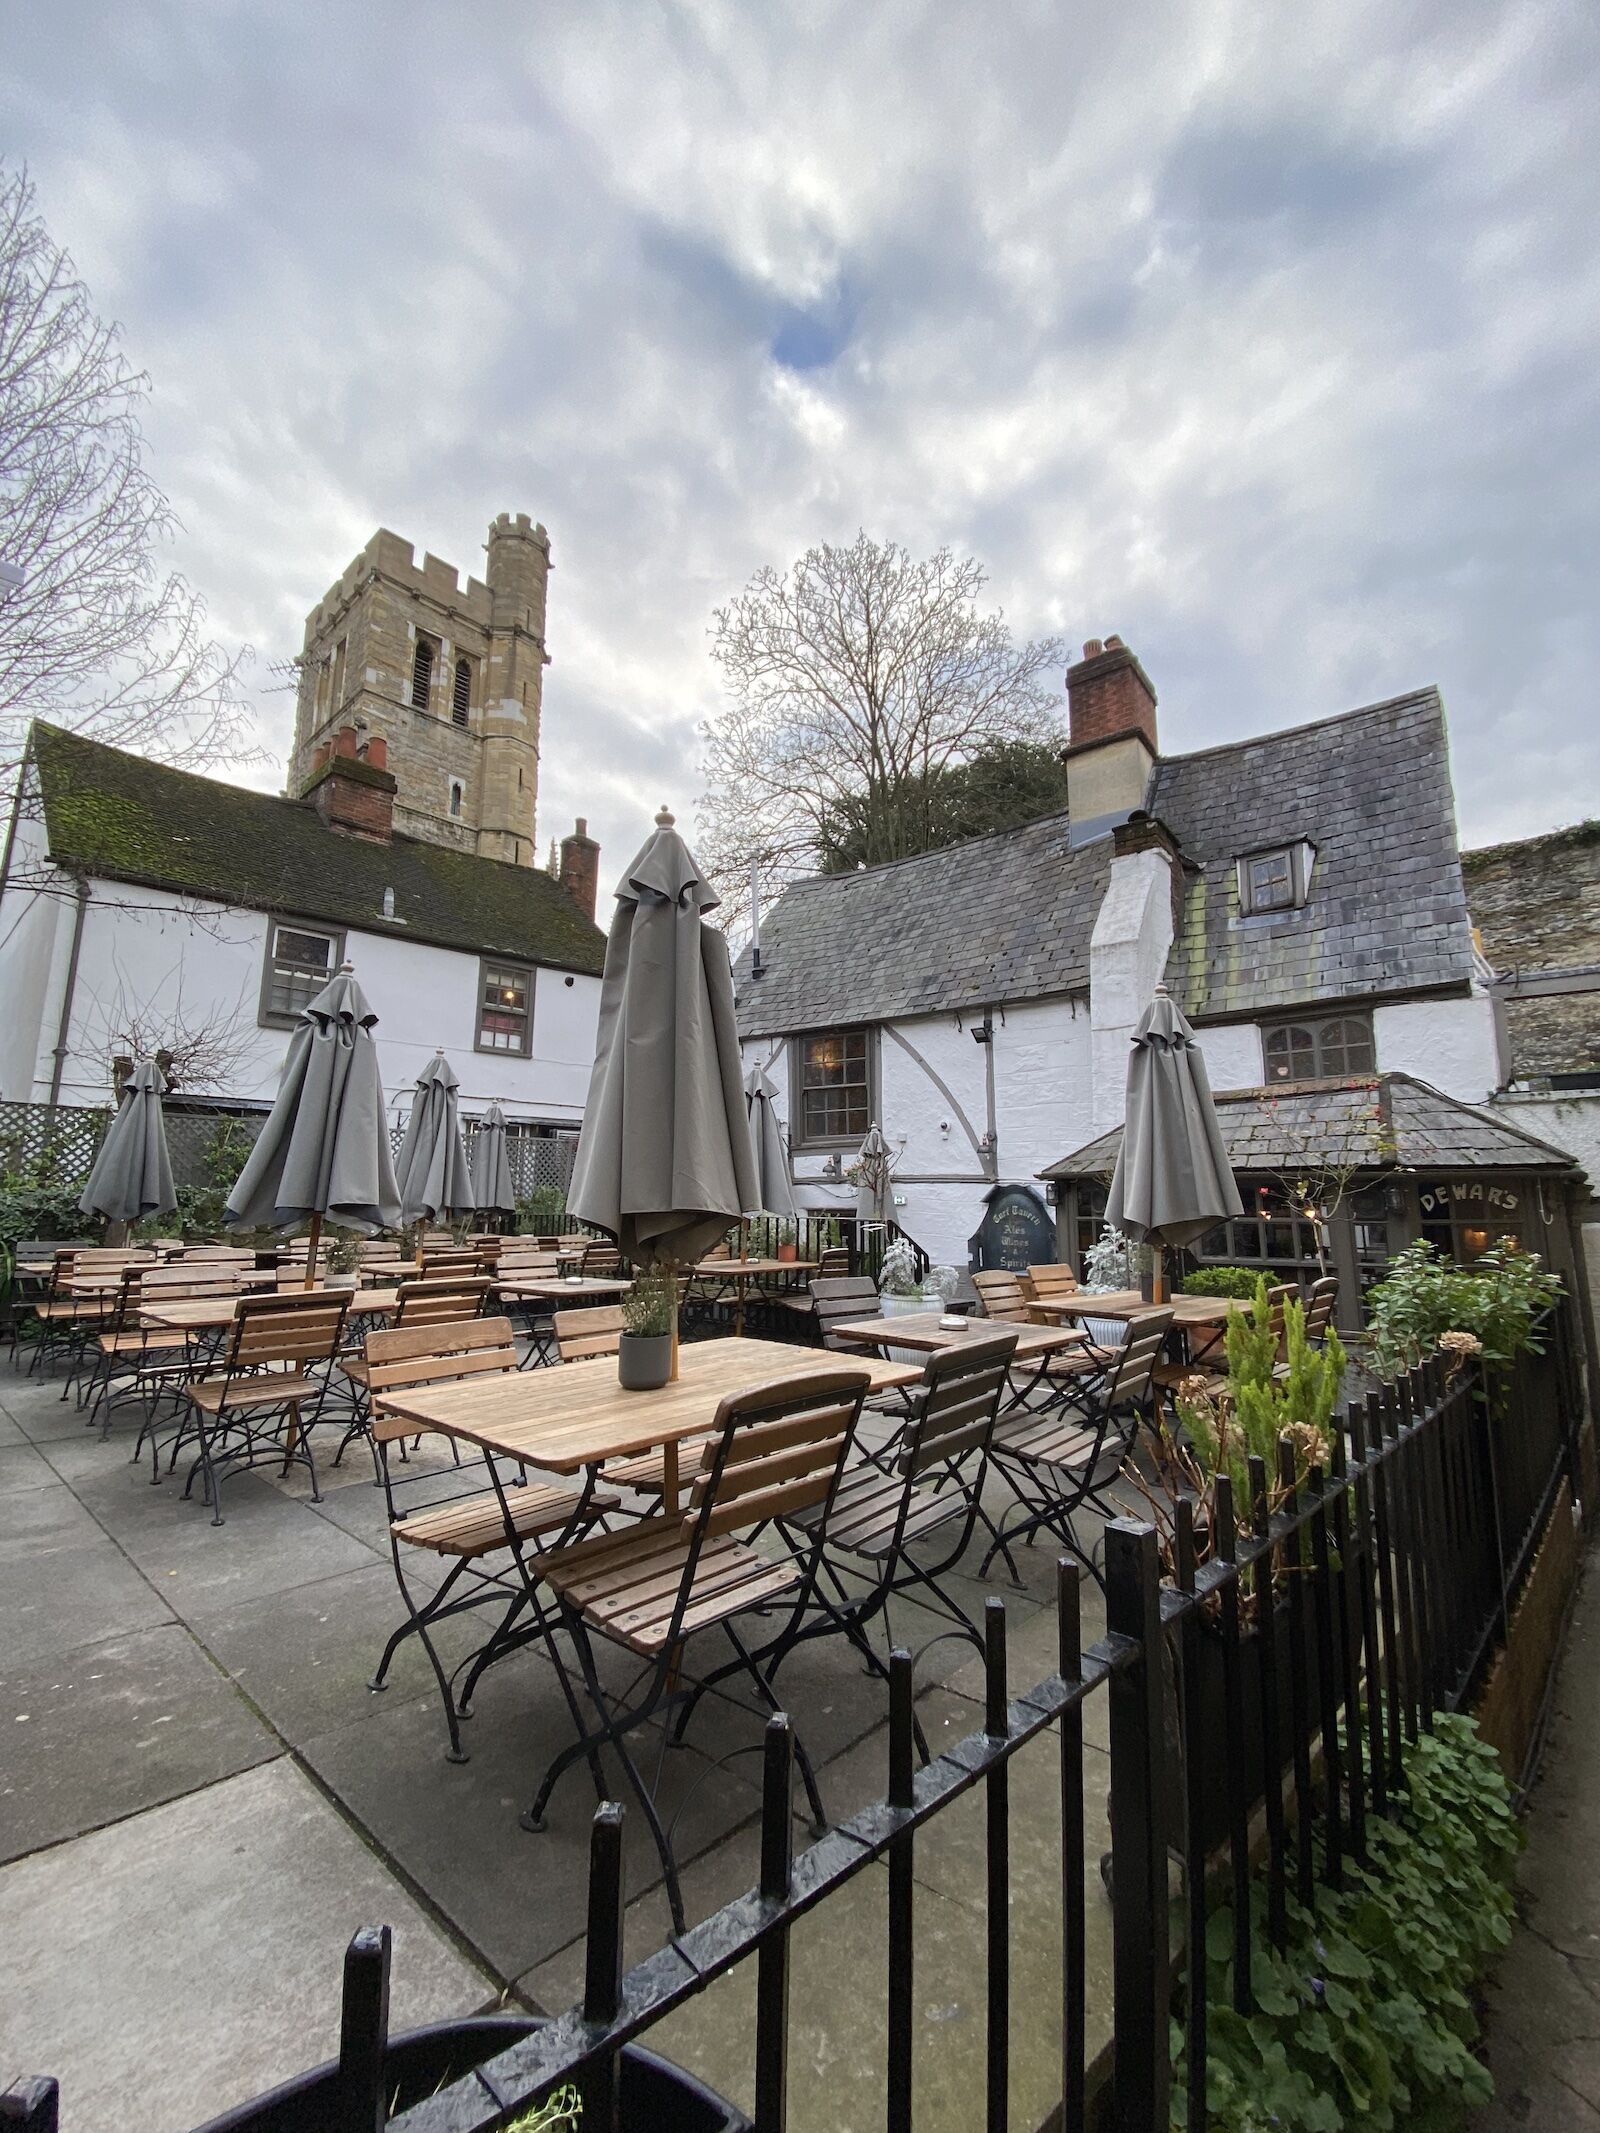 Things to to do in Oxford, England: Have lunch and a drink at the Turf Tavern